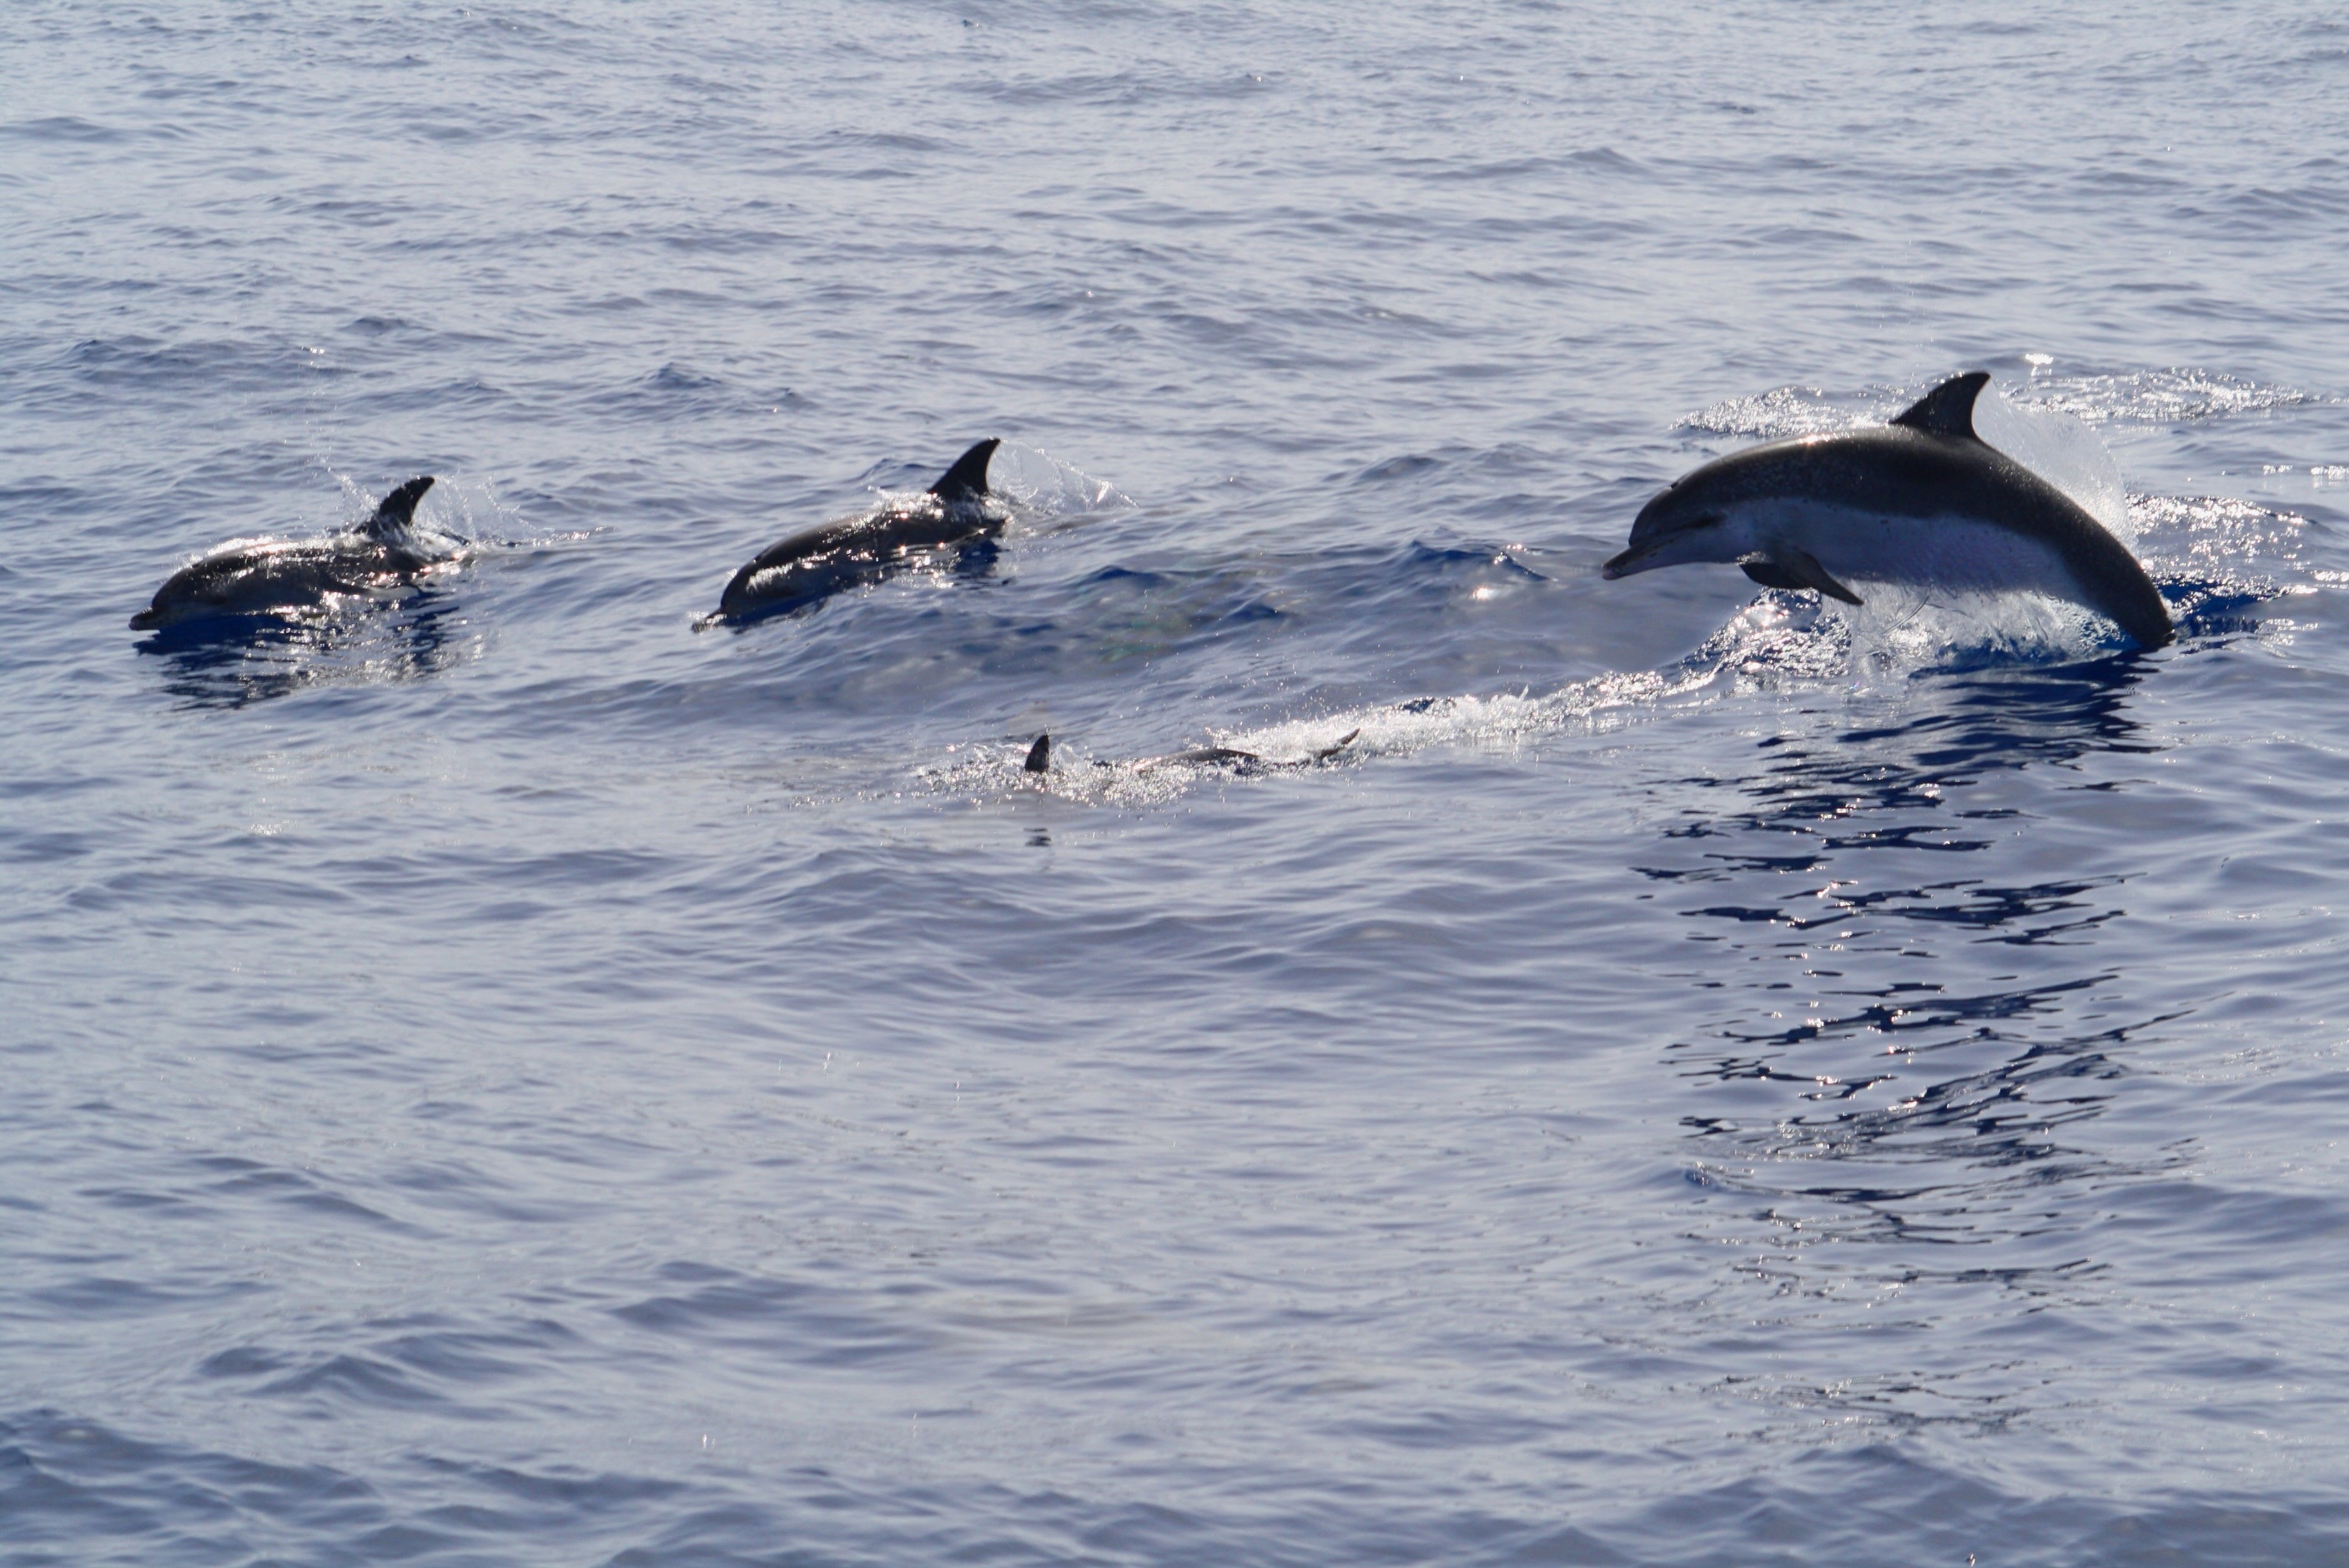 group of dolphins